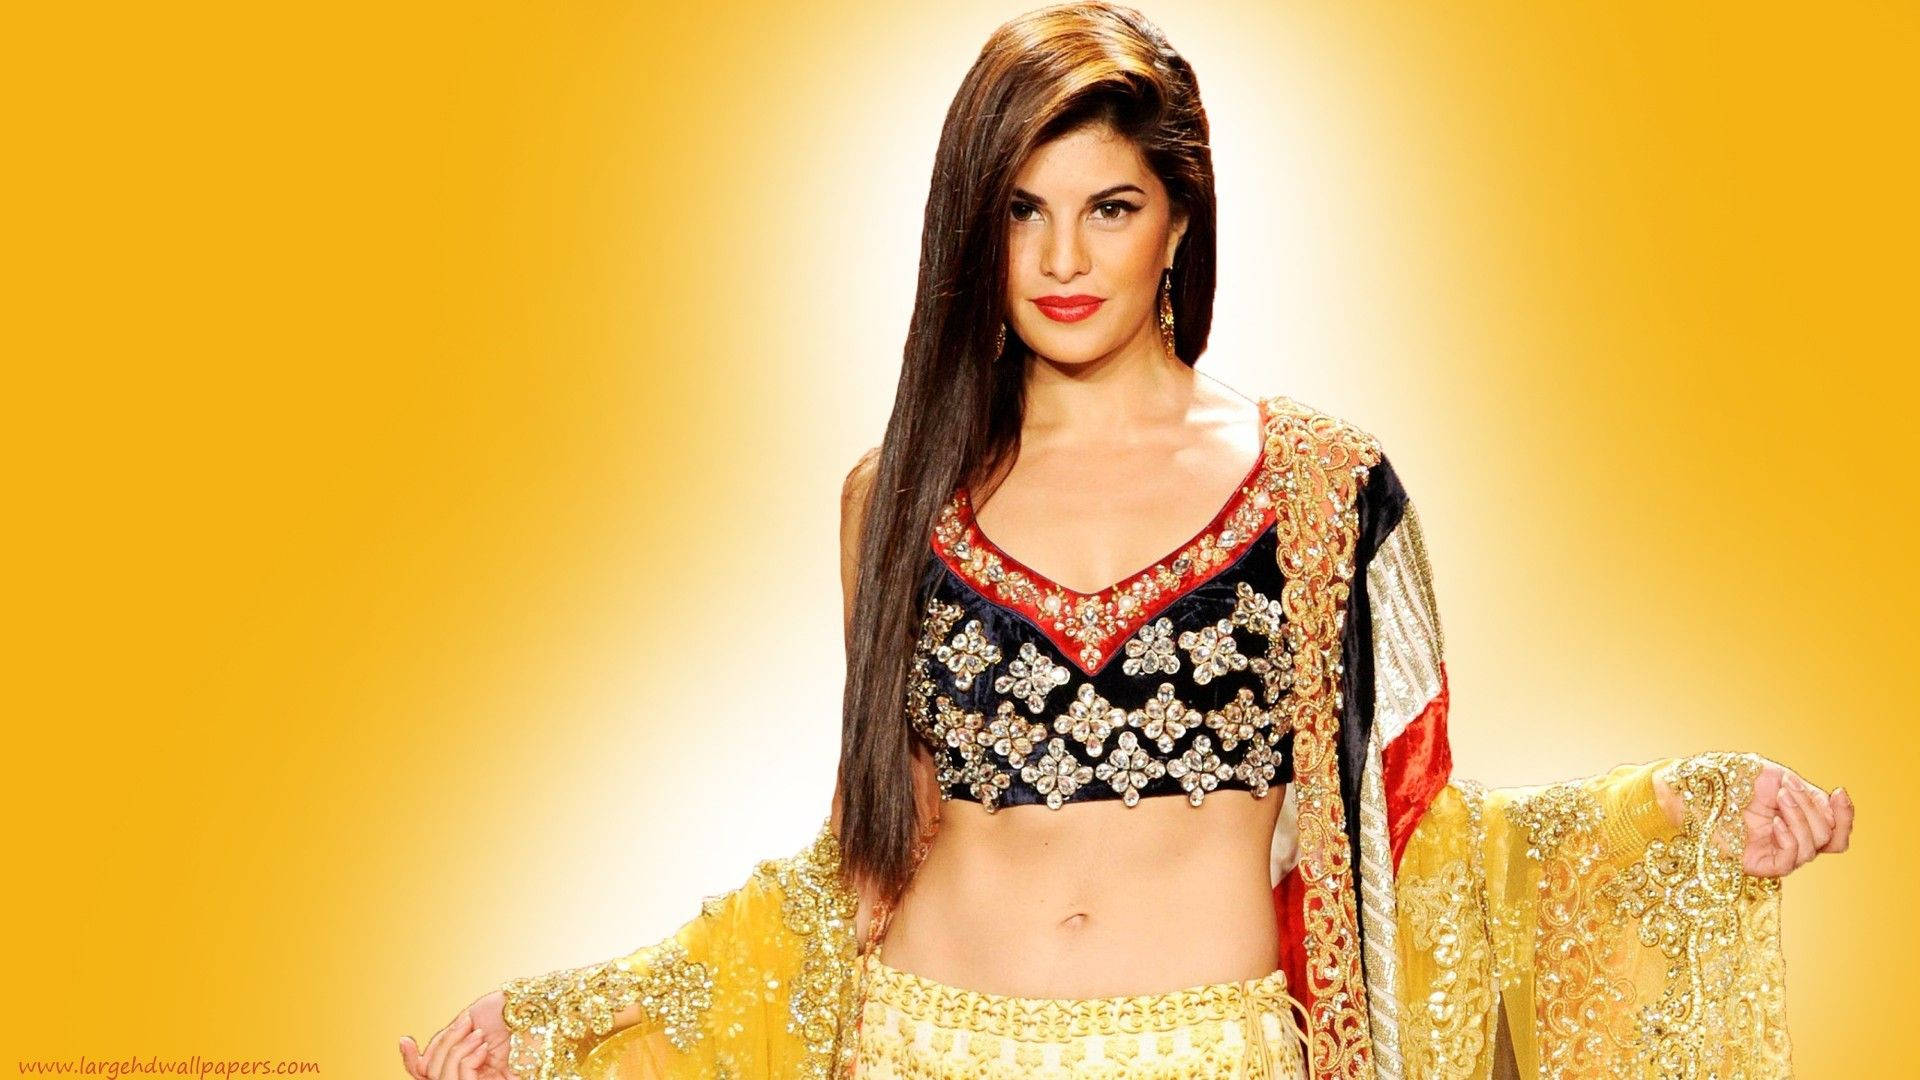 Jacqueline Fernandez Traditional Outfit Background